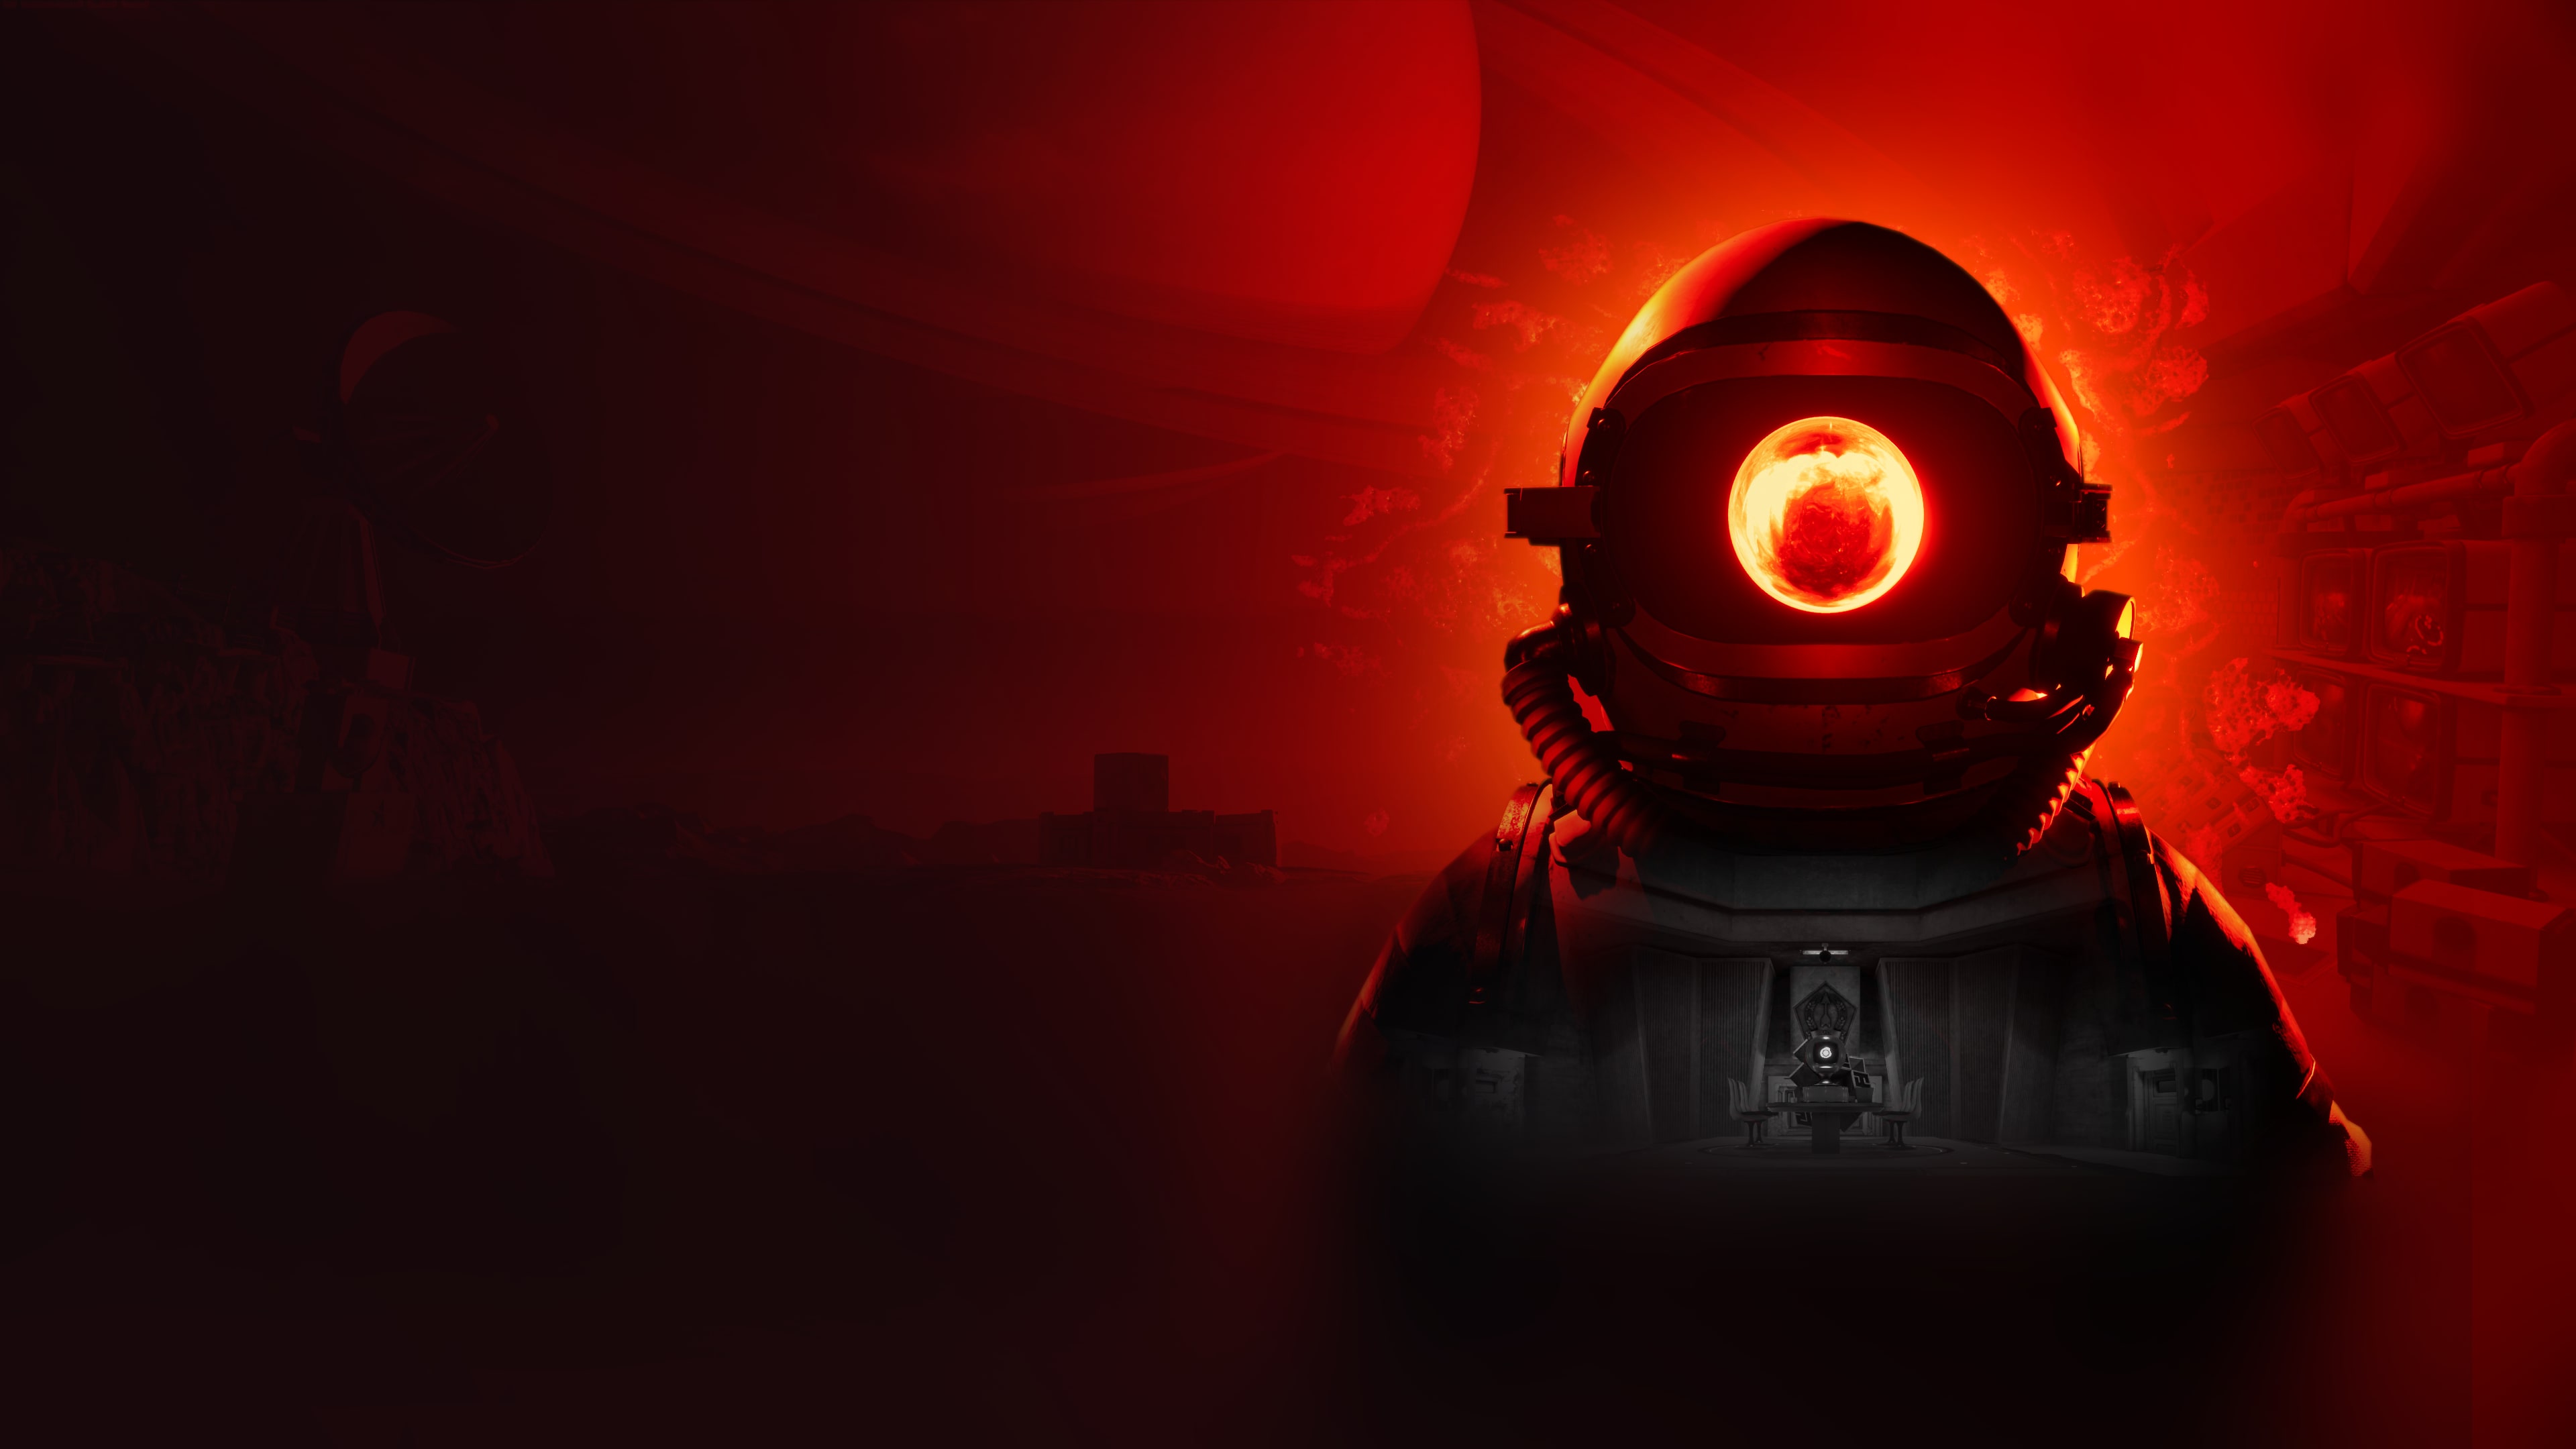 red matter vr review